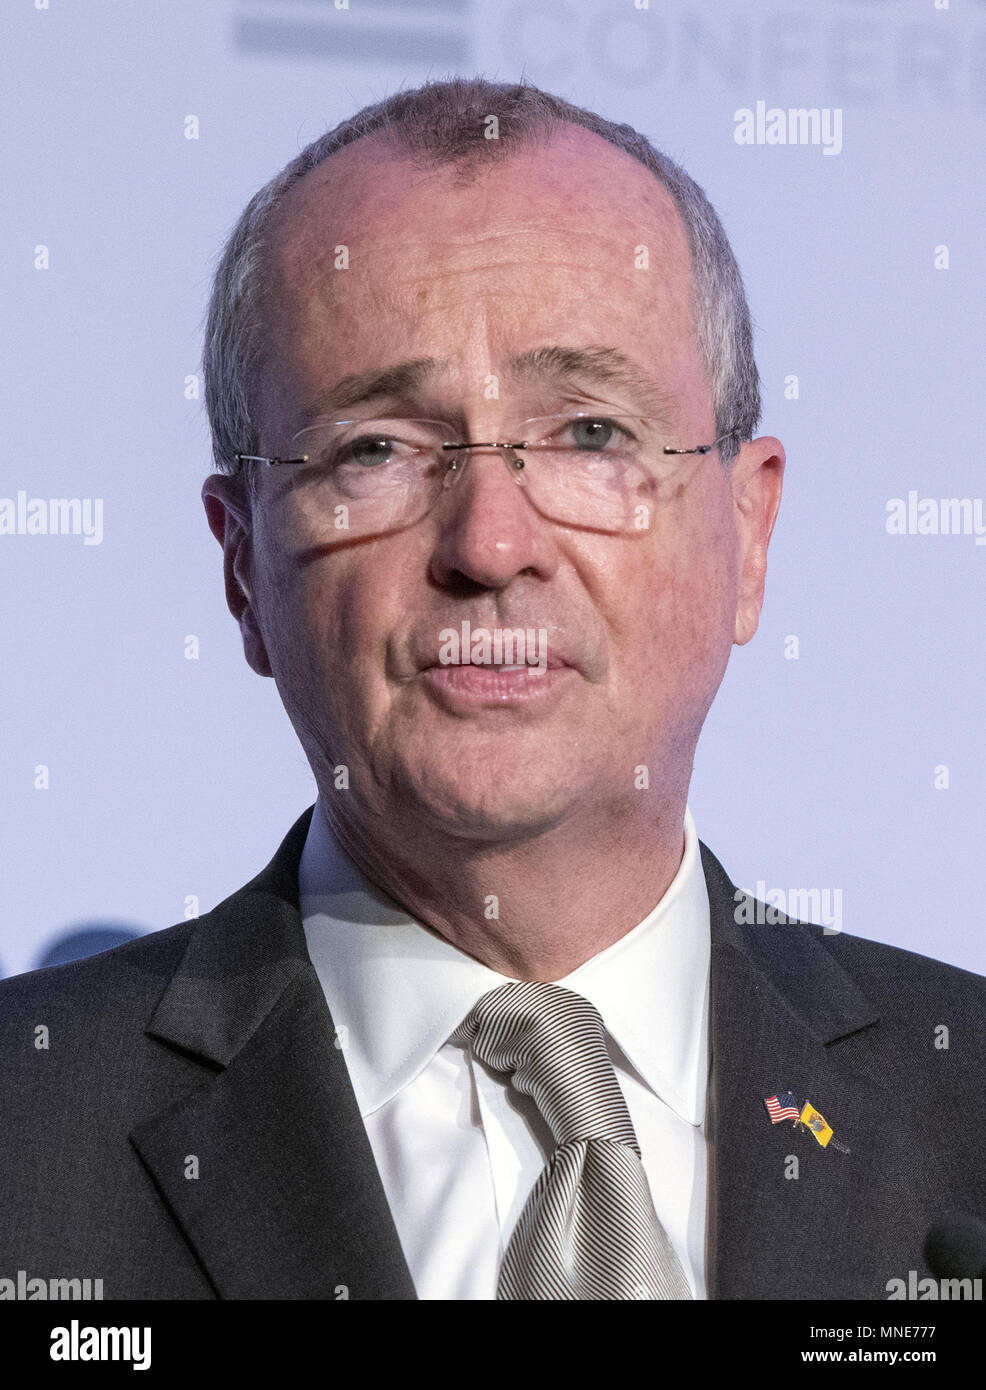 Washington, District of Columbia, USA. 15th May, 2018. Governor Phil Murphy (Democrat of New Jersey) makes remarks at the Center for American Progress' 2018 Ideas Conference at the Renaissance Hotel in Washington, DC on Tuesday, May 15, 2018.Credit: Ron Sachs/CNP. Credit: Ron Sachs/CNP/ZUMA Wire/Alamy Live News Stock Photo